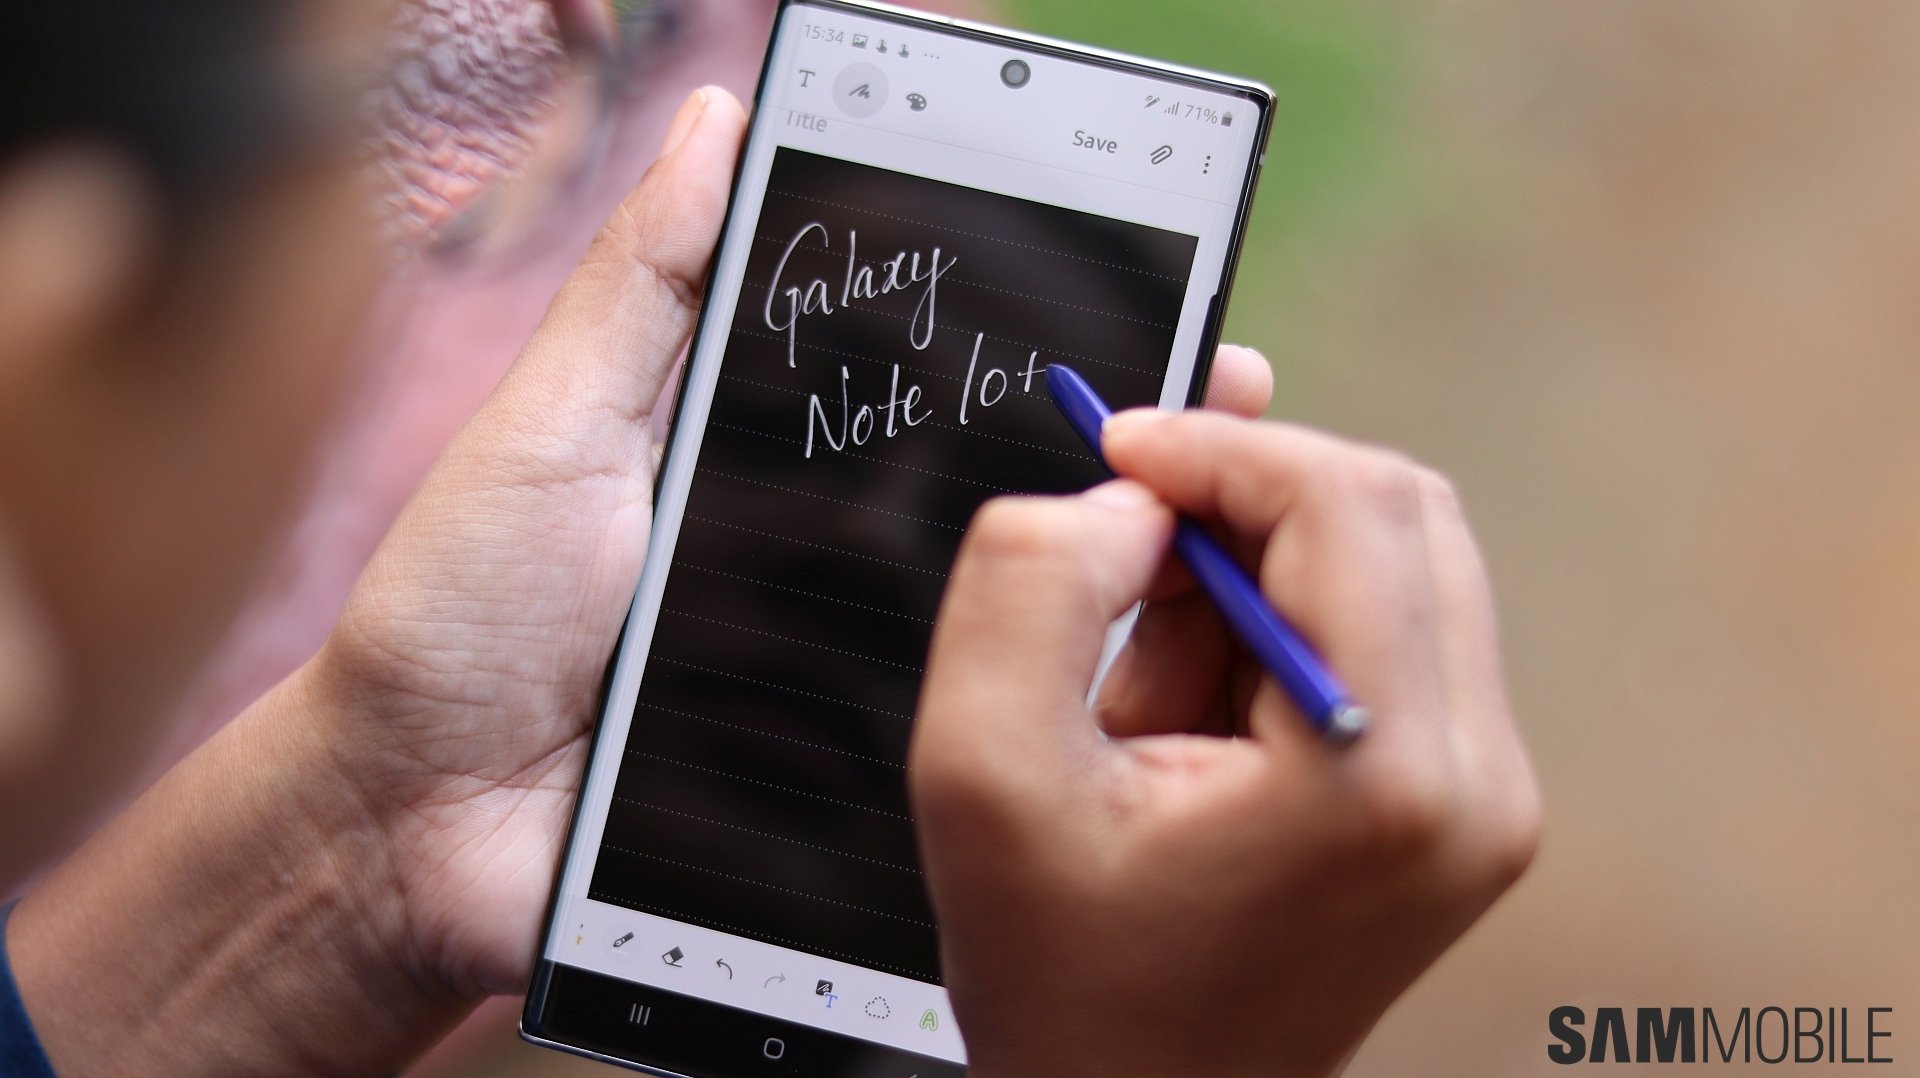 Samsung Galaxy Note 10 Plus long-term review: Worth it in 2020?